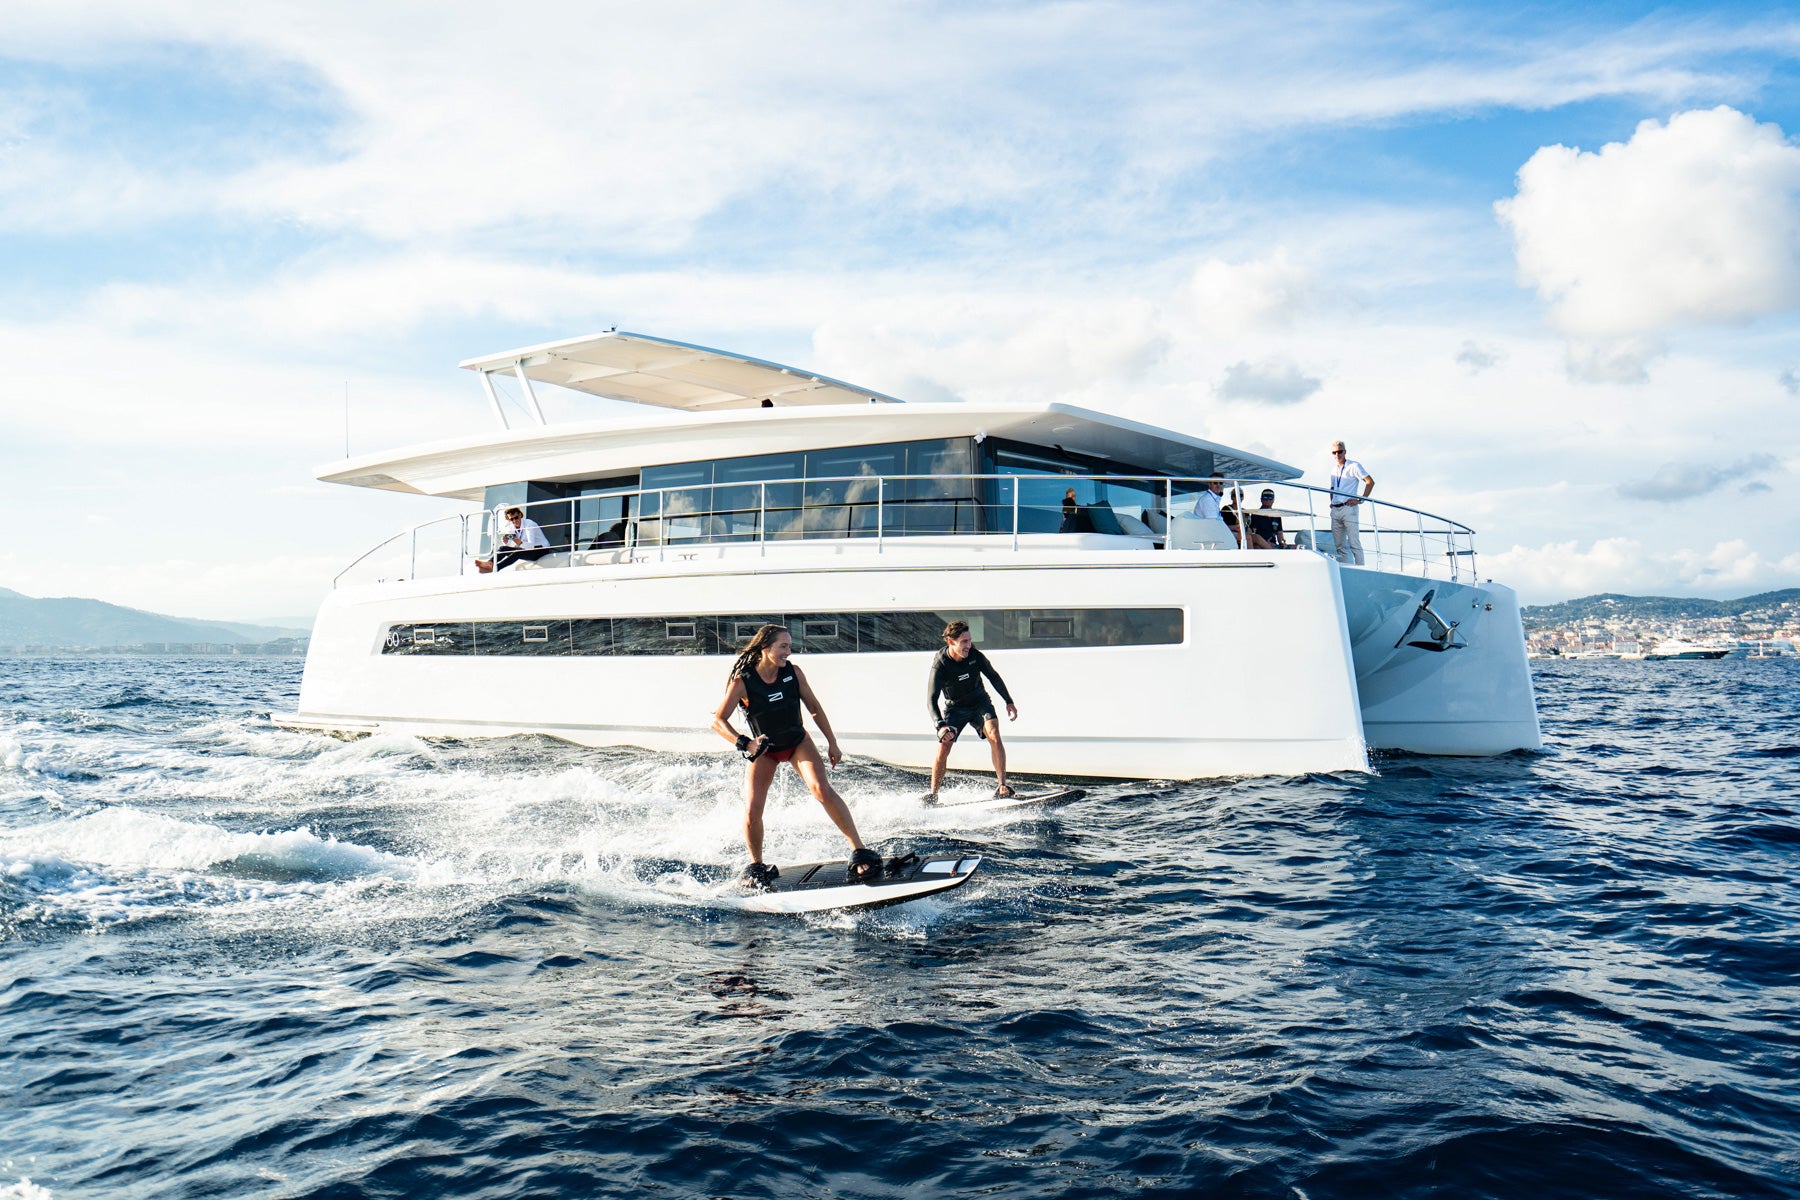 Two RAVIK Jetboard riders with backdrop of a yacht.